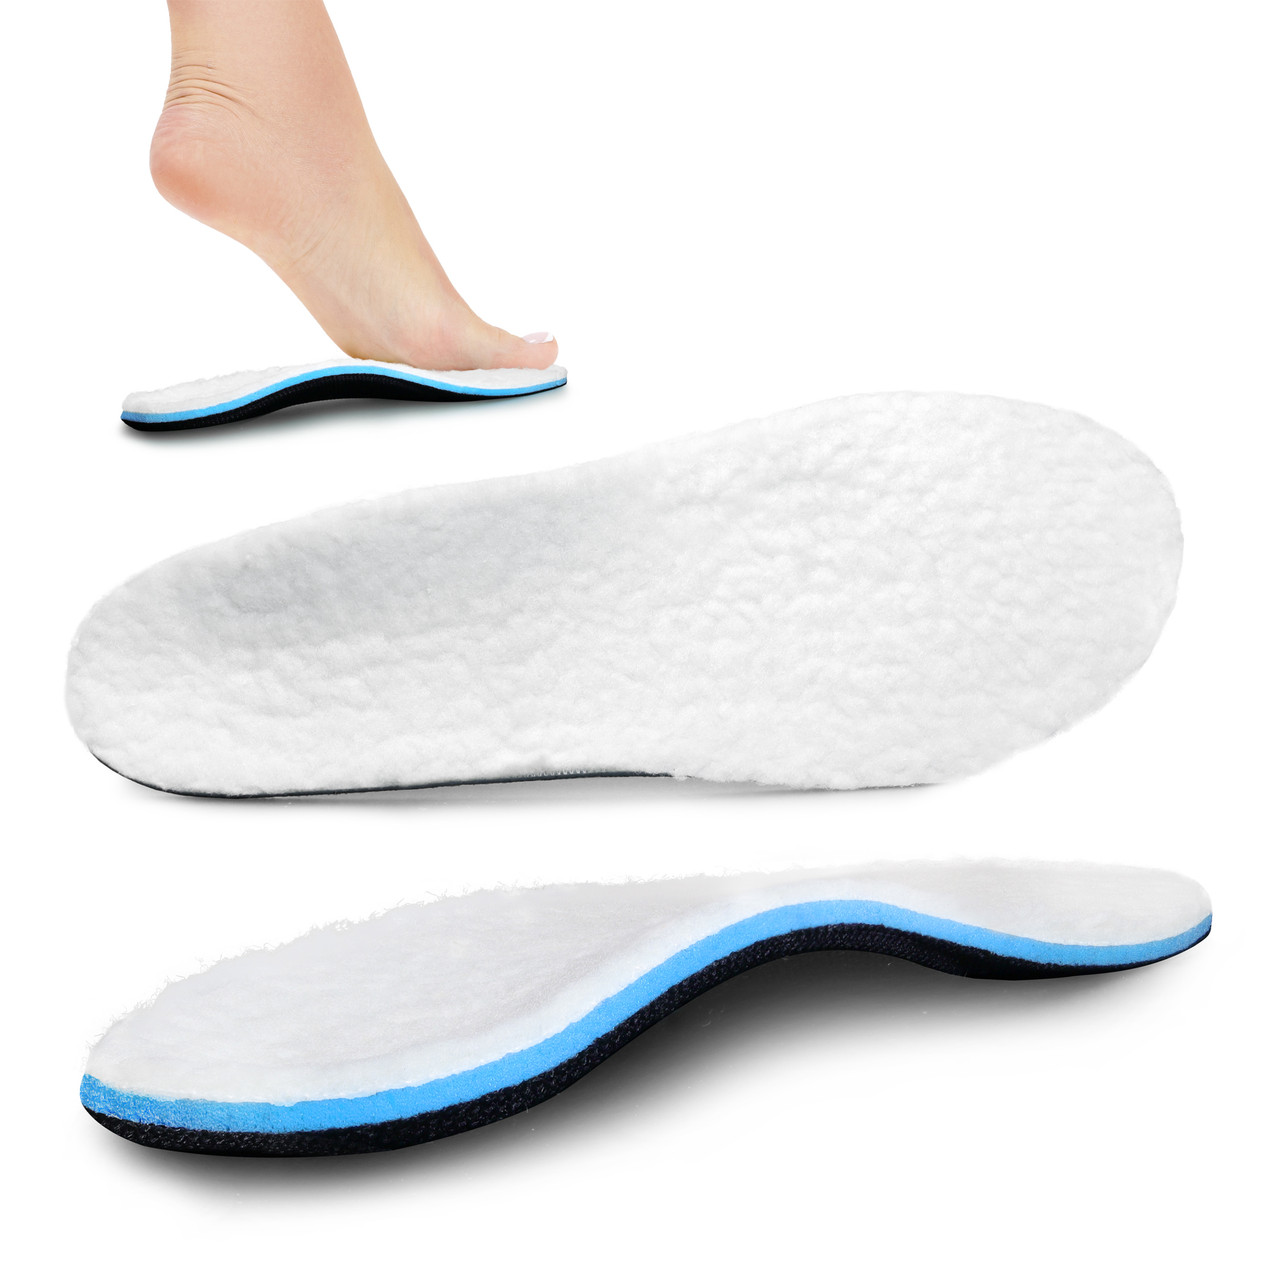 Shearling Orthotic Insoles - Inserts w/ Arch Support for Slippers,  Sheepskin Lined Boots - ORTHOS Footwear